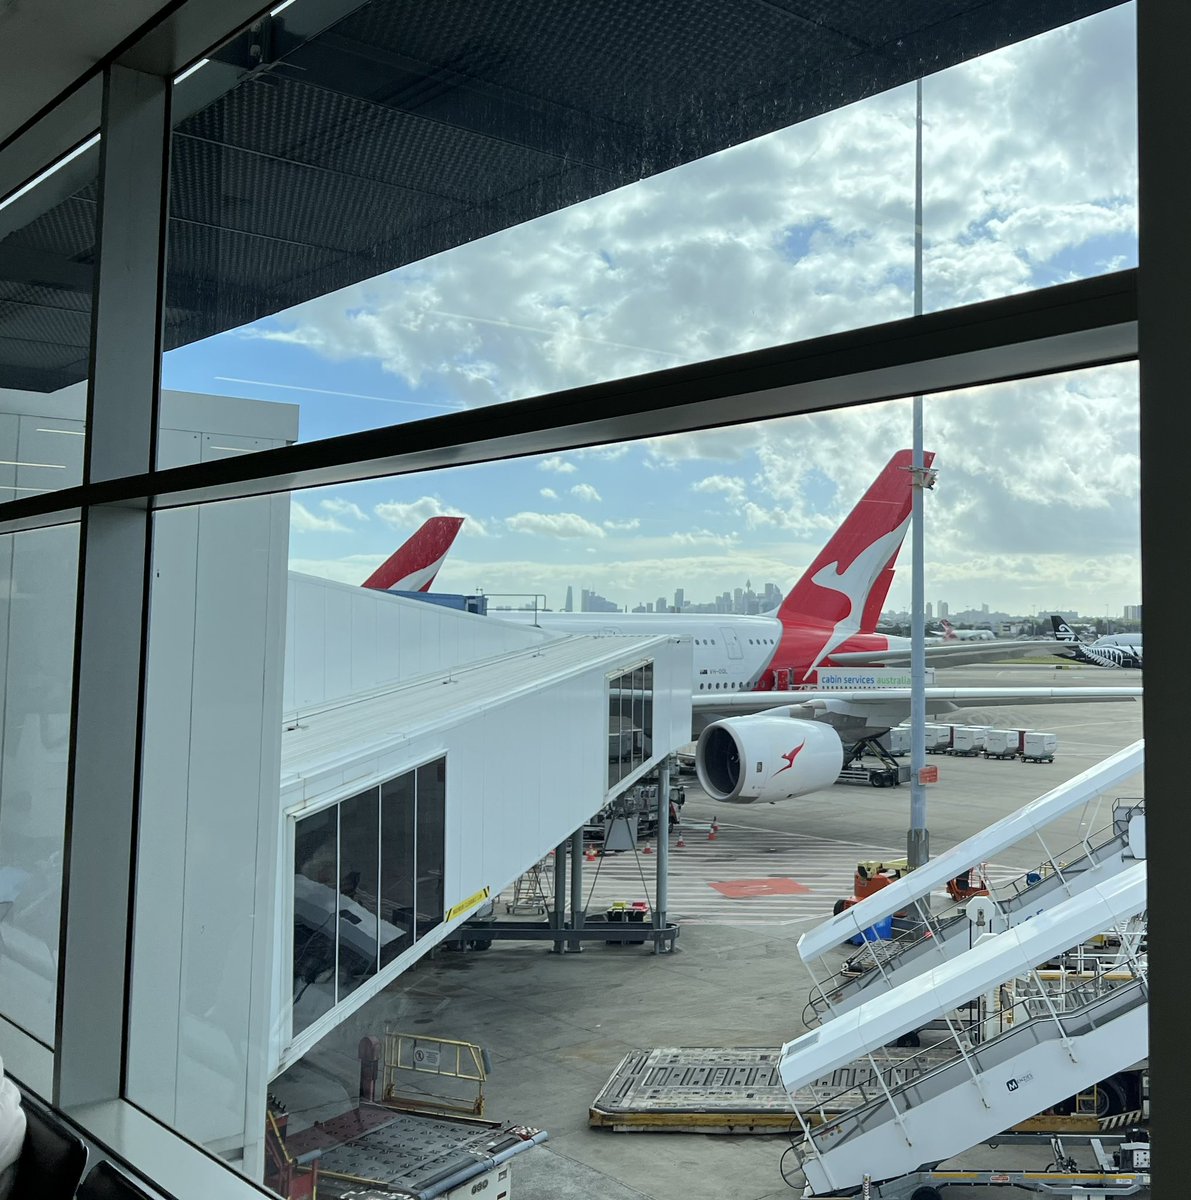 Boarding the big flight to RSA in SFO. Looking forward to catching up with customers and partners. We’ll have six @AirlockDigital team members mincing about the conference. Also look forward to putting some Twitter names to faces!